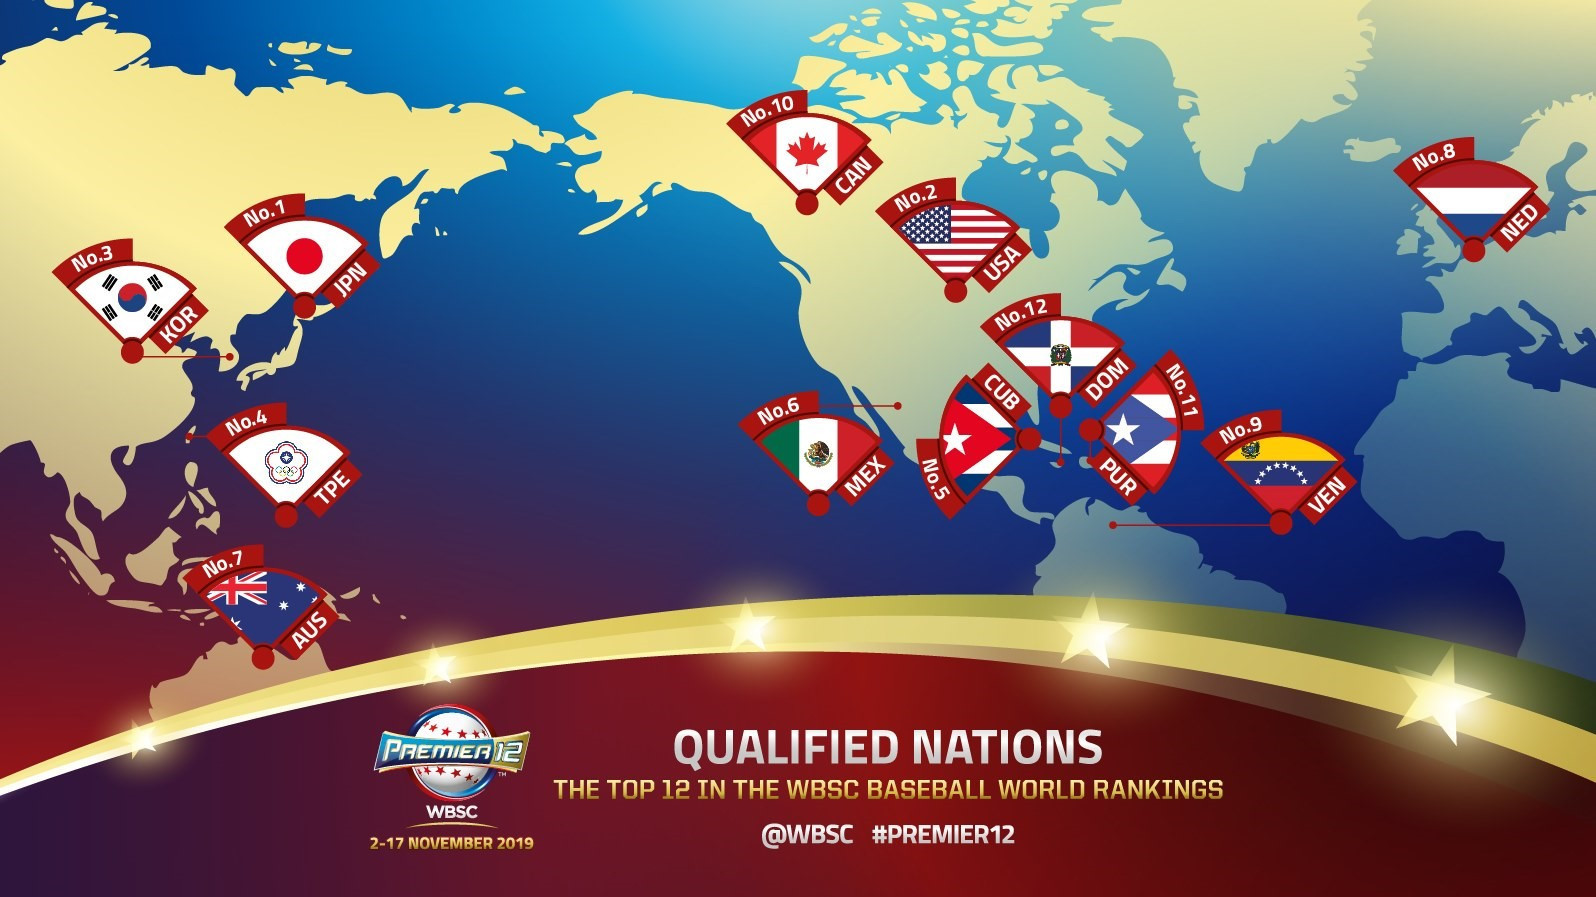 The WBSC have confirmed the qualified nations for the Premier12 tournament ©WBSC